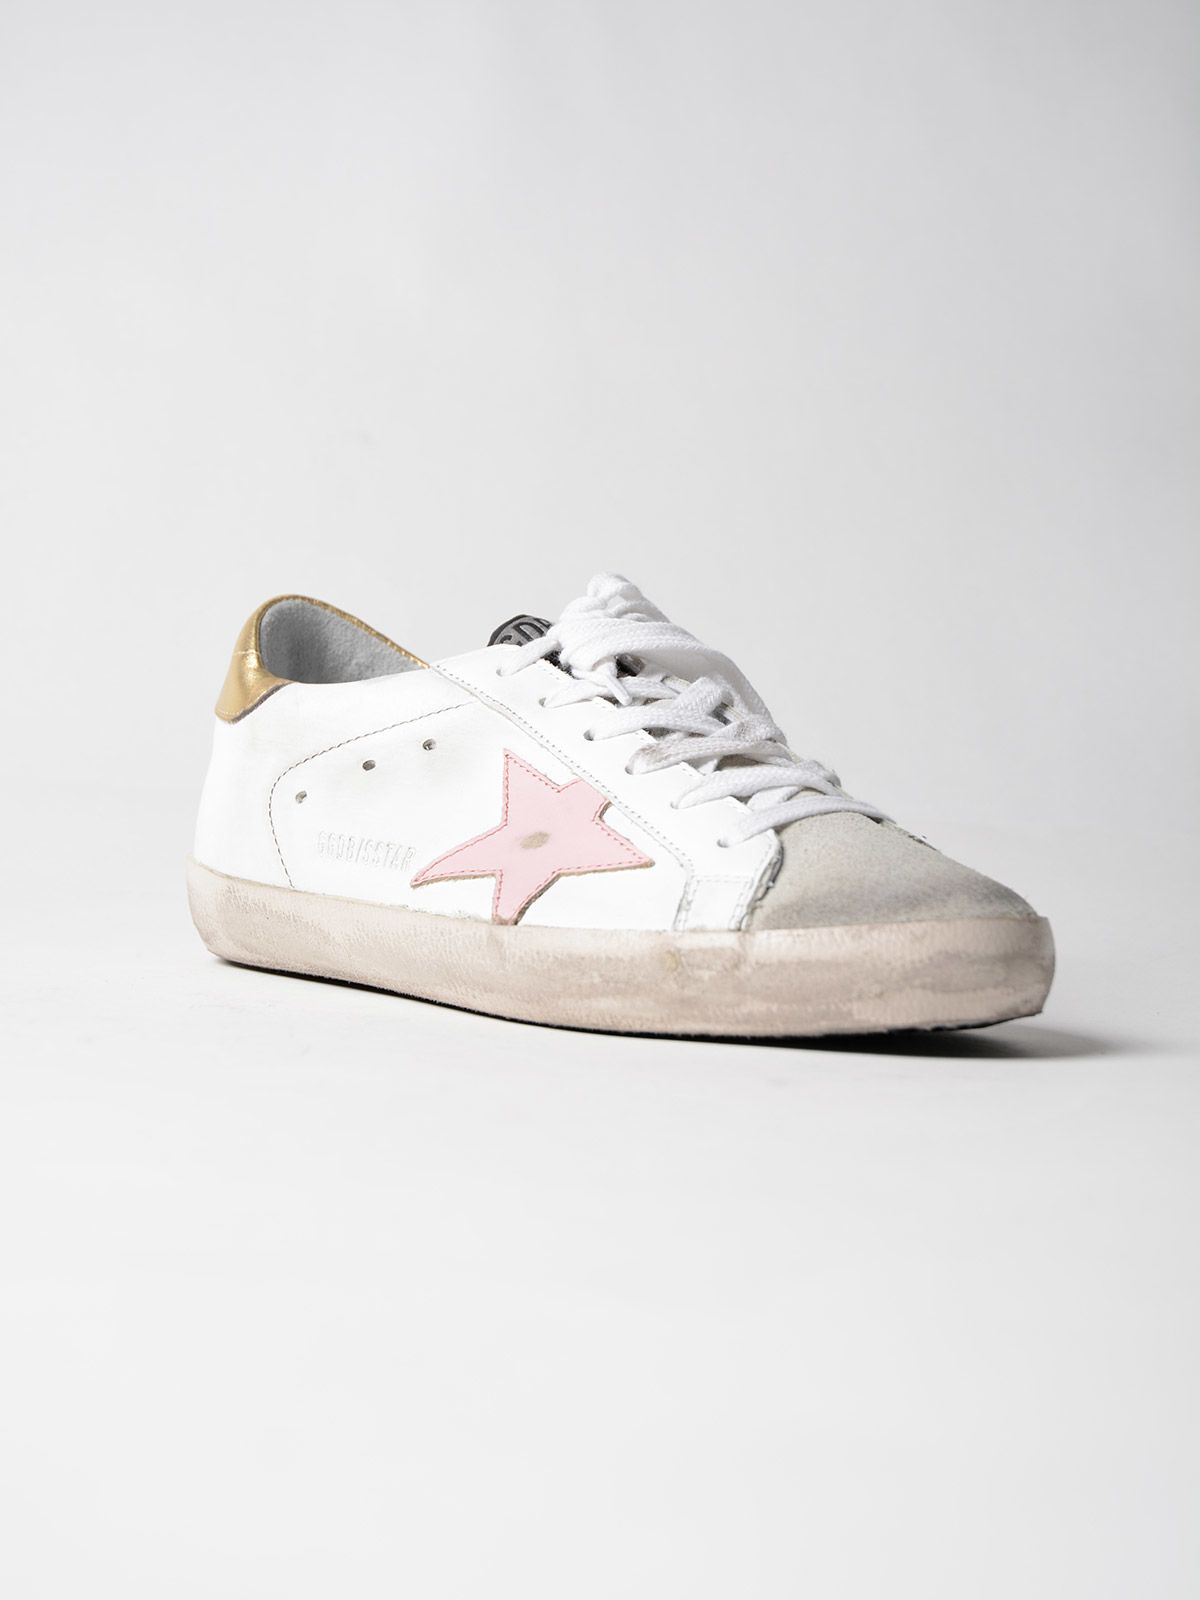 Women's White & Rose Gold Cheap Adidas Superstar Trainers schuh IE